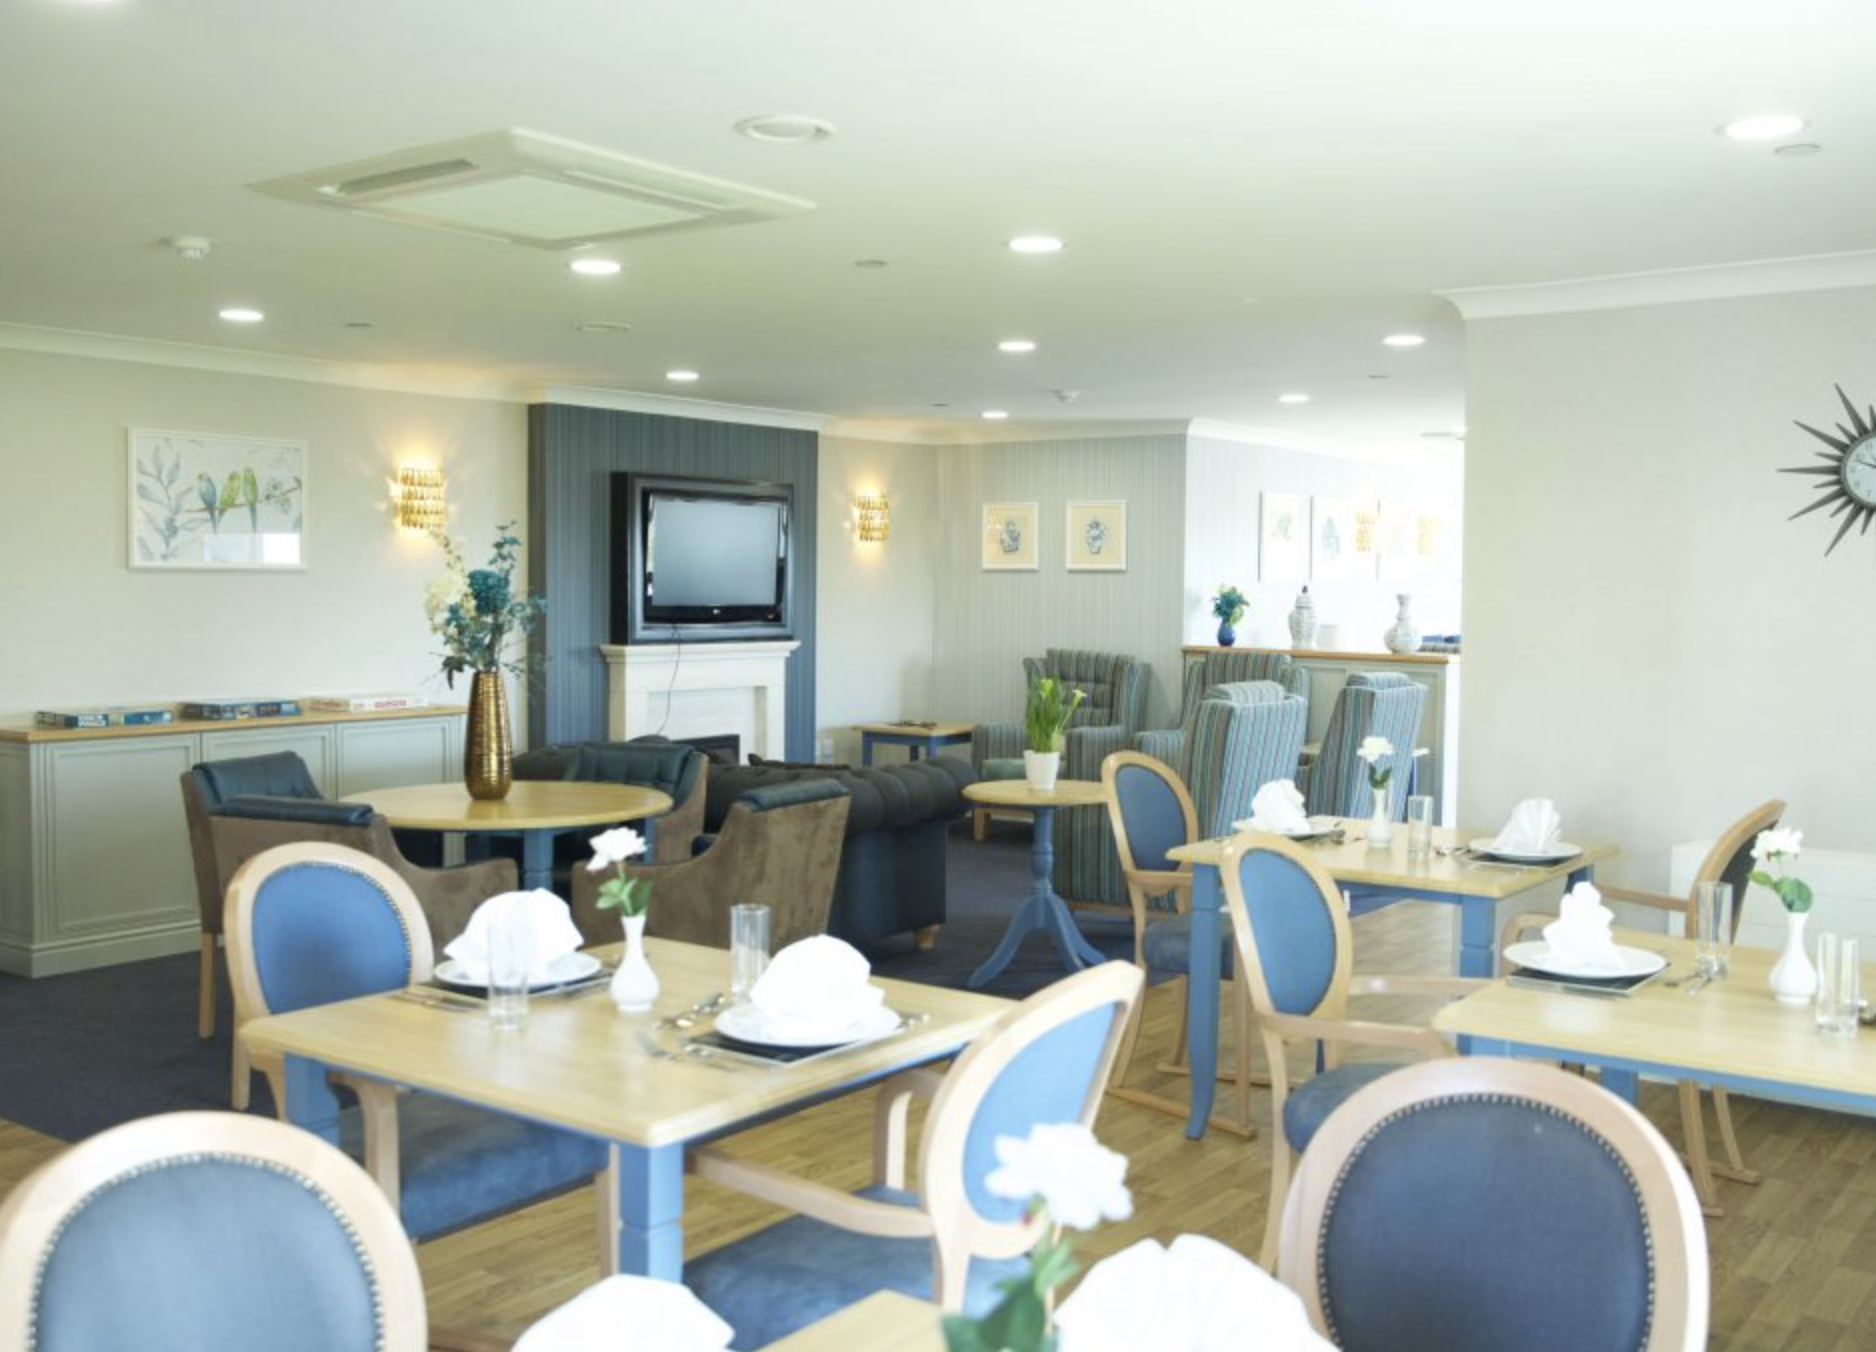 Dining area of Carlton Court care home in Barnet, London